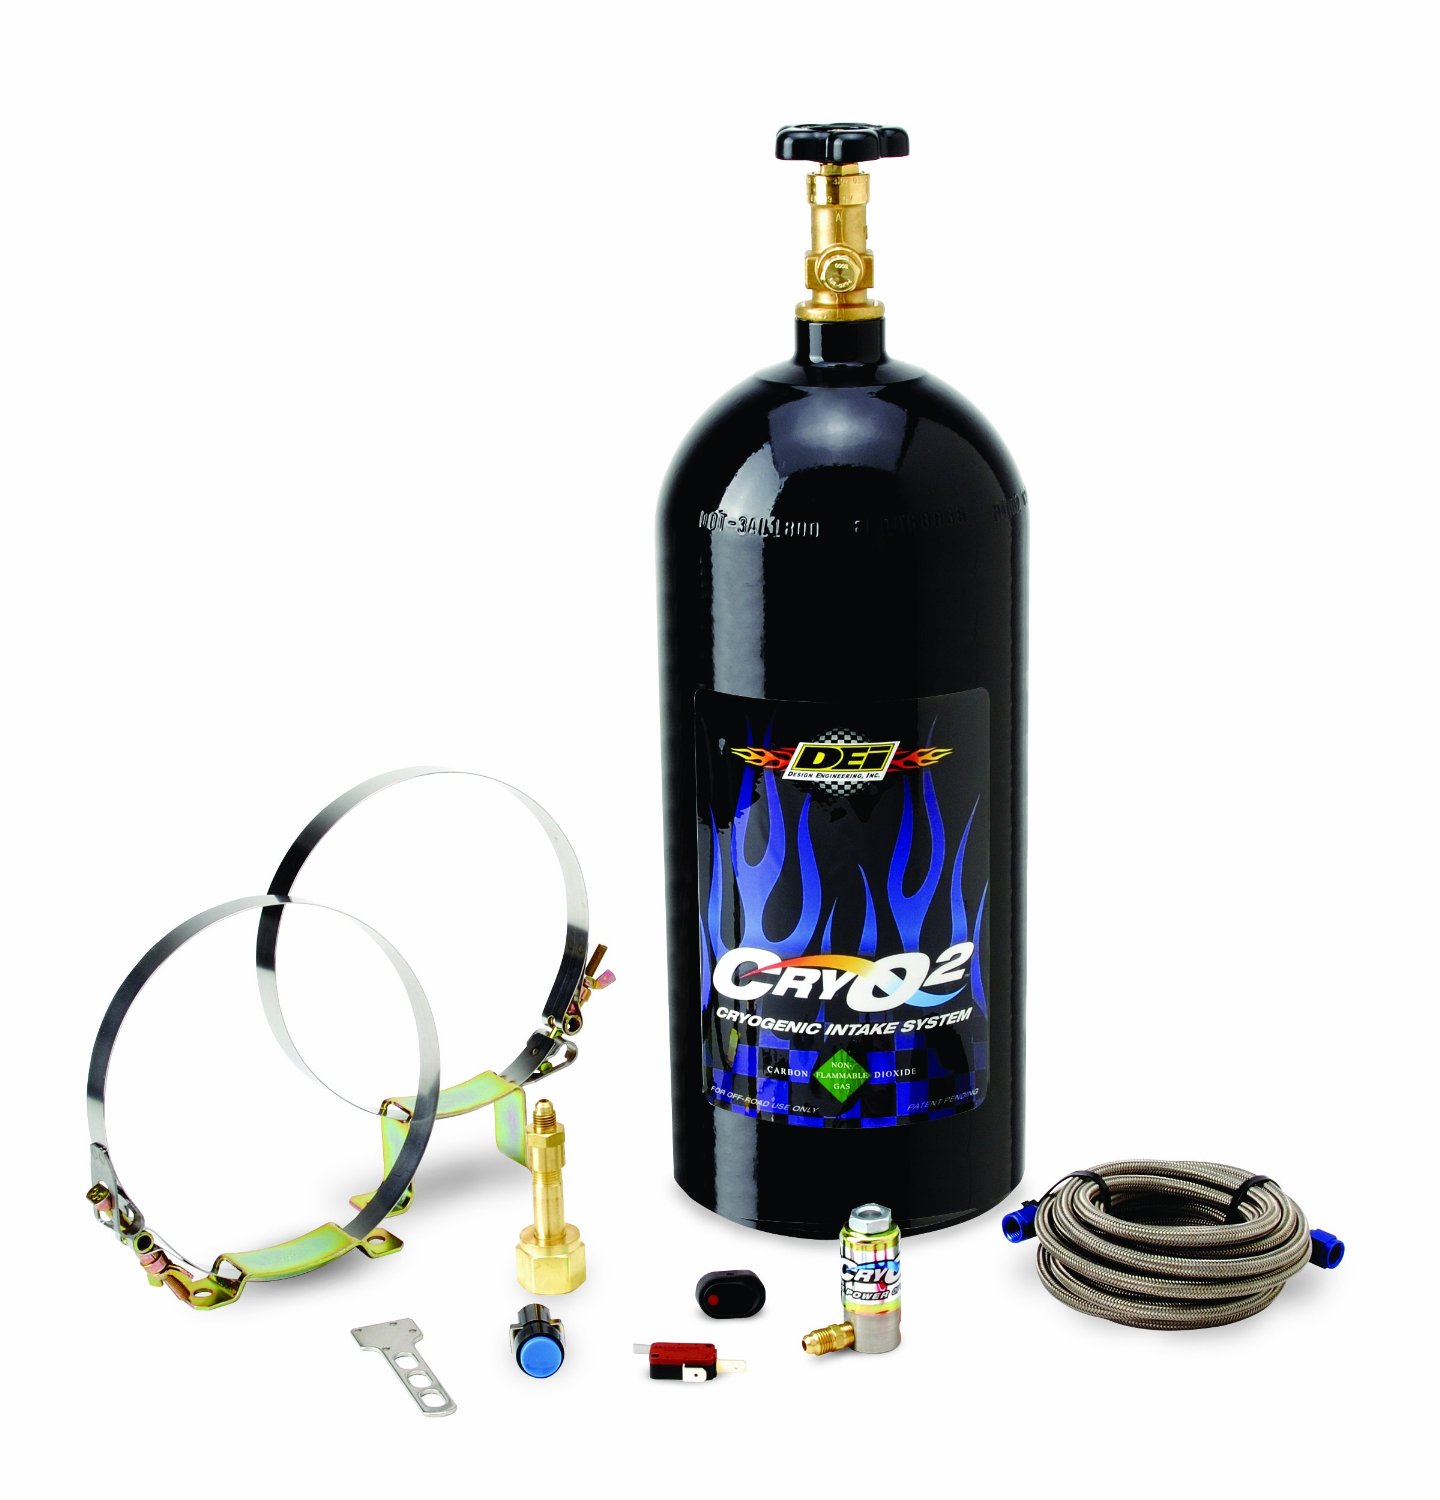 CRY02 Tank and Installation Kit (10 lb Tank) Includes Pedal Switch, Solenoid & Accessories - Suitable for Nitrous